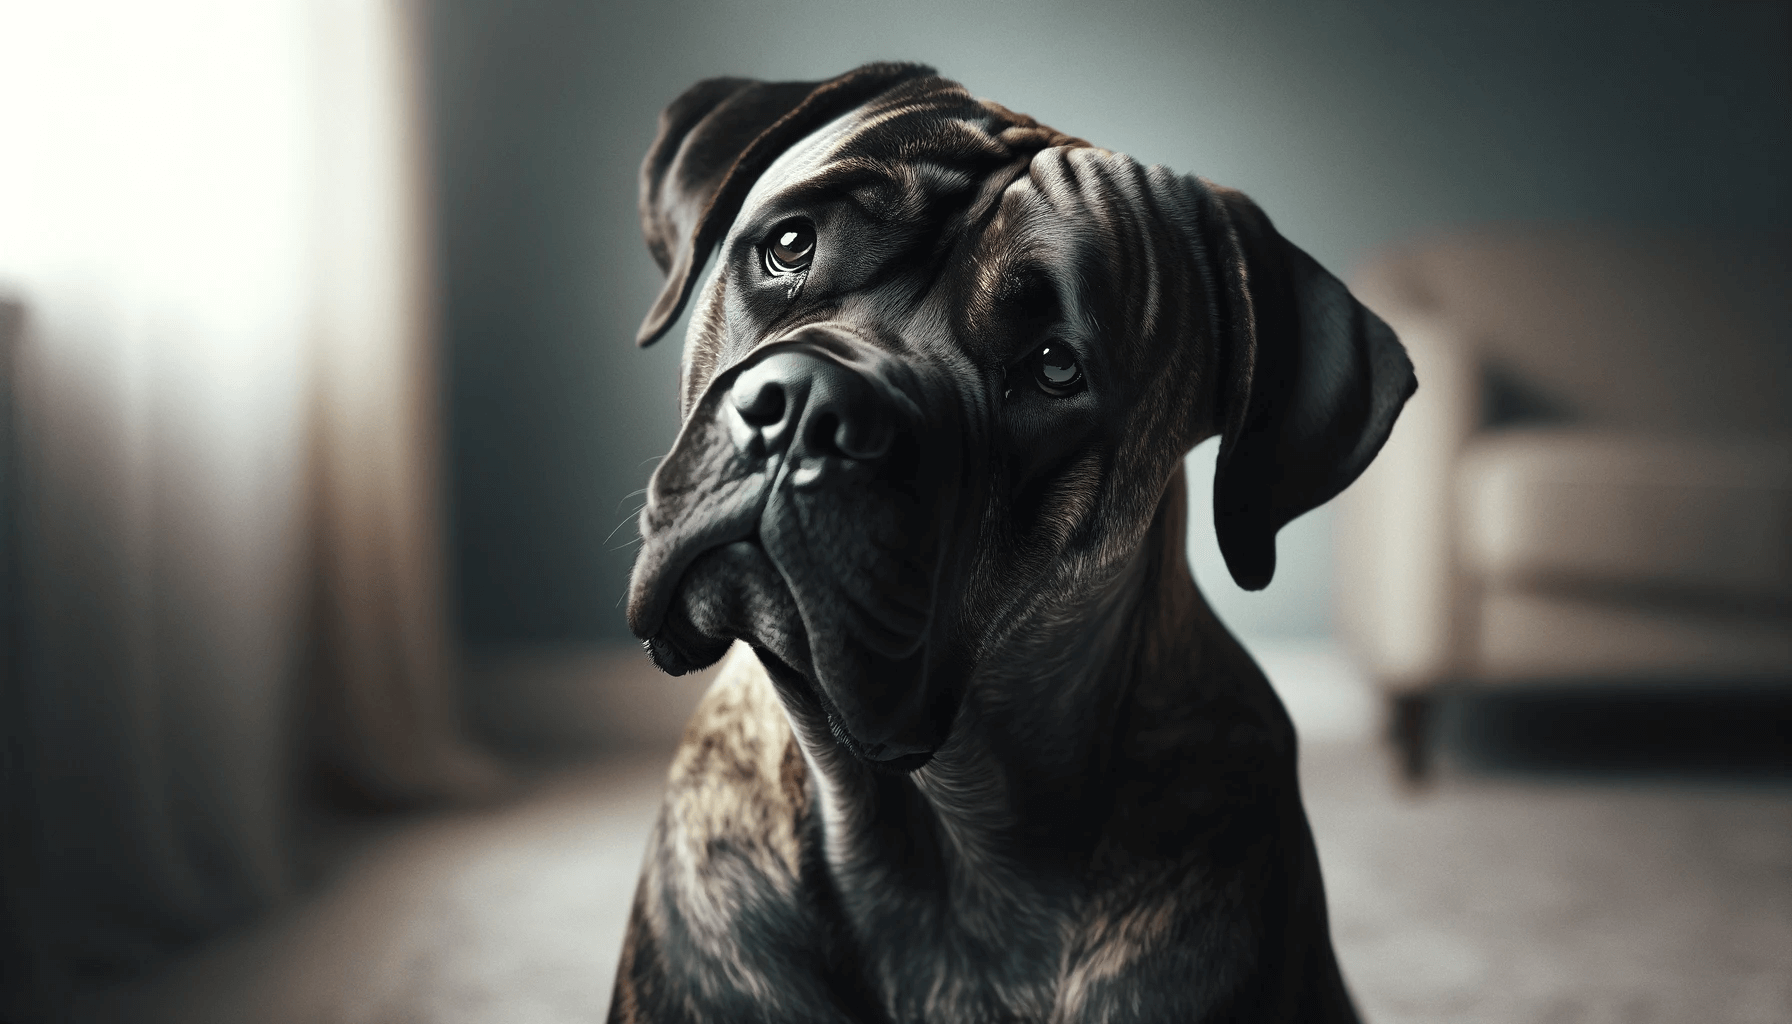 A Brindle Cane Corso with a head tilt and a thoughtful expression, as if contemplating deeply, displaying its inquisitive nature.